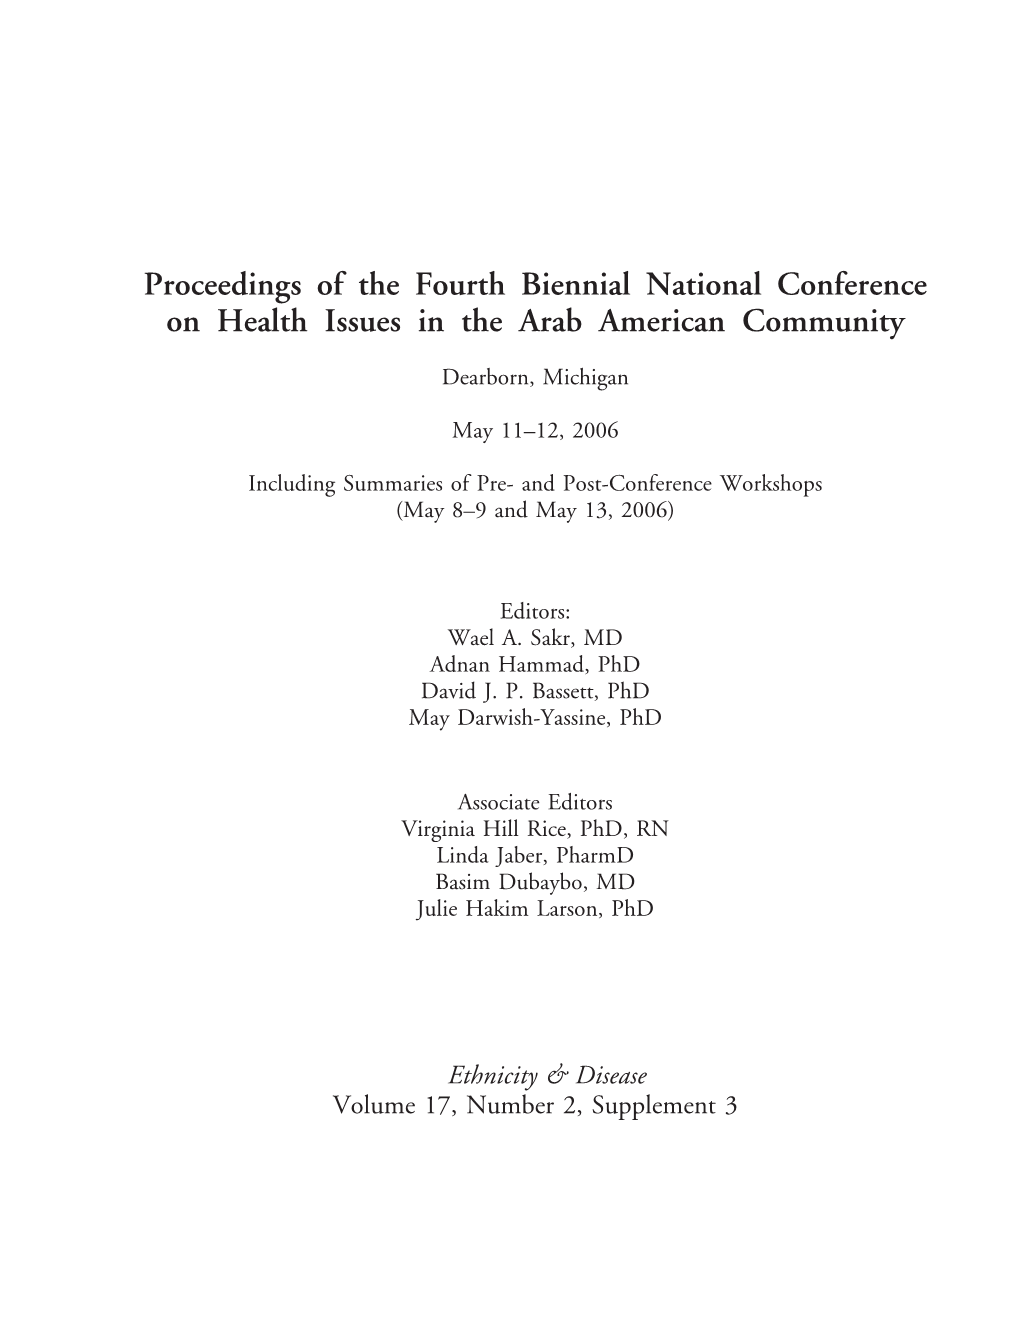 Proceedings of the Fourth Biennial National Conference on Health Issues in the Arab American Community